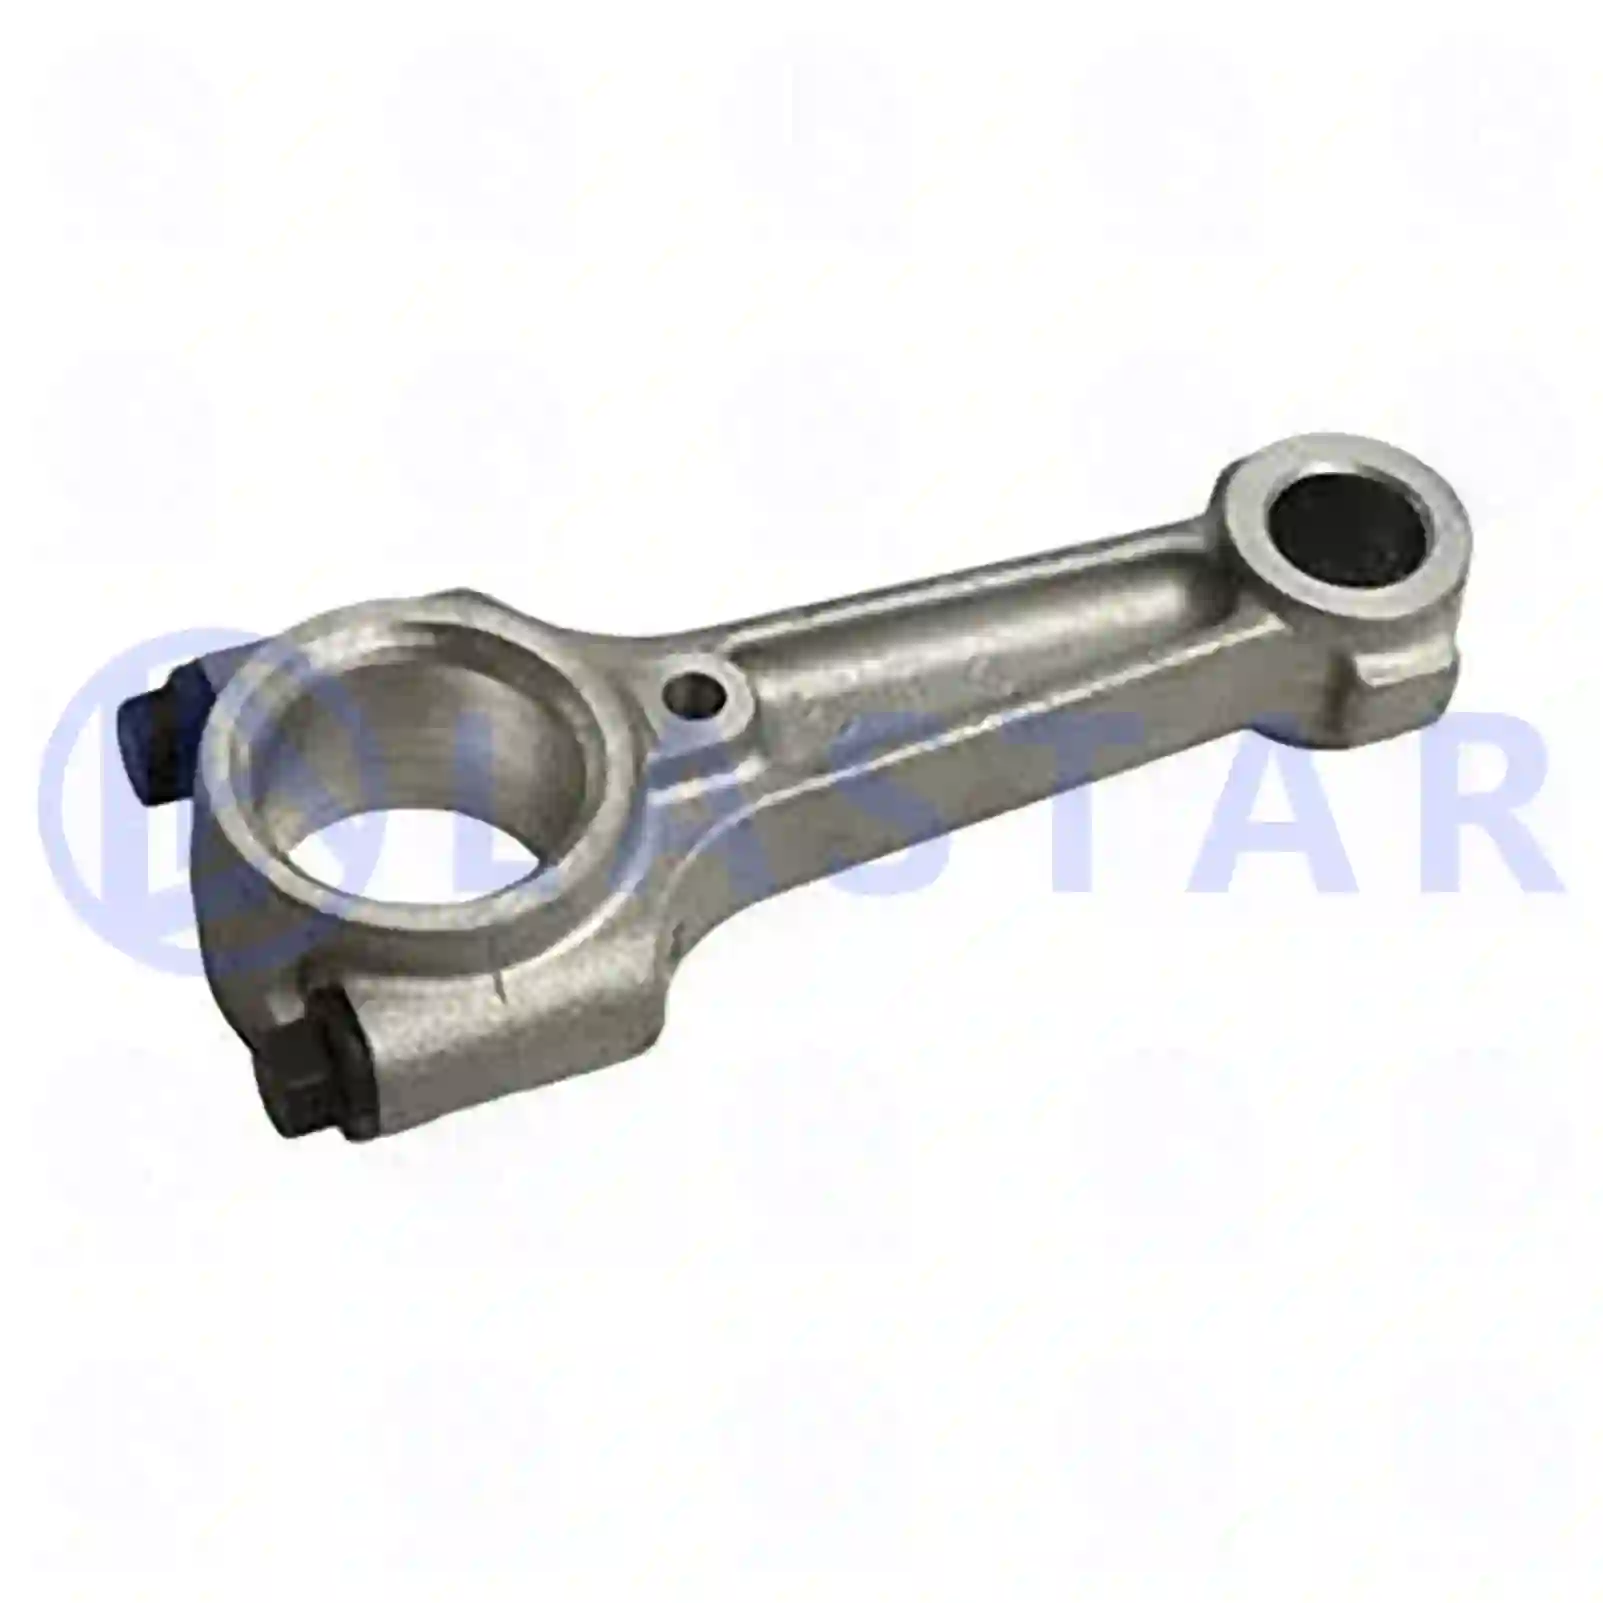 Connecting rod, 77713923, 1322814, 232063, 1518356, 3090257 ||  77713923 Lastar Spare Part | Truck Spare Parts, Auotomotive Spare Parts Connecting rod, 77713923, 1322814, 232063, 1518356, 3090257 ||  77713923 Lastar Spare Part | Truck Spare Parts, Auotomotive Spare Parts